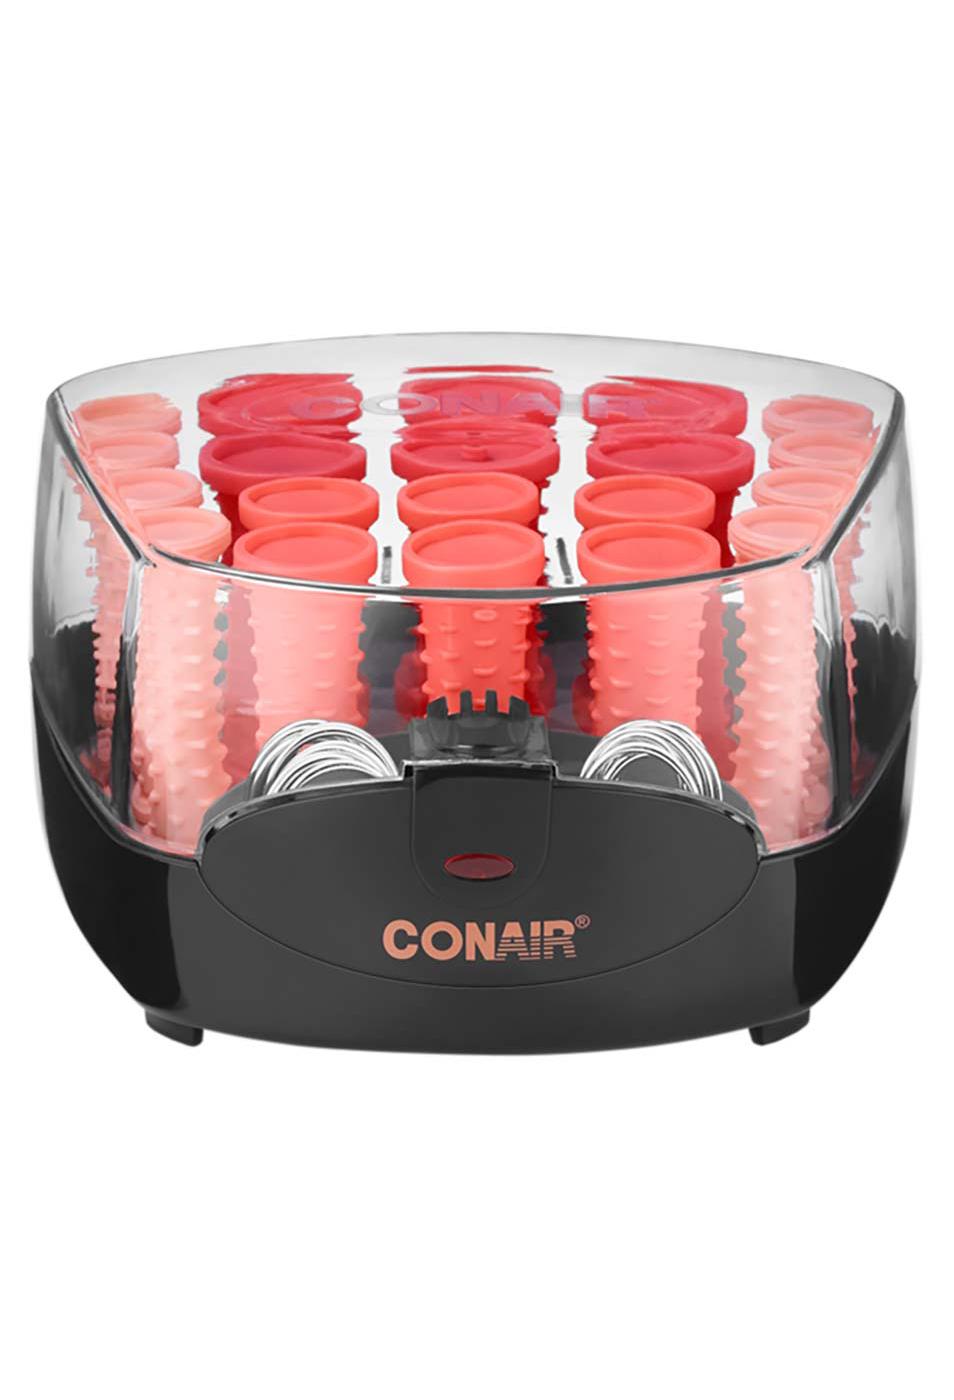 Conair Curls & Waves Multi-Sized Rollers; image 1 of 2